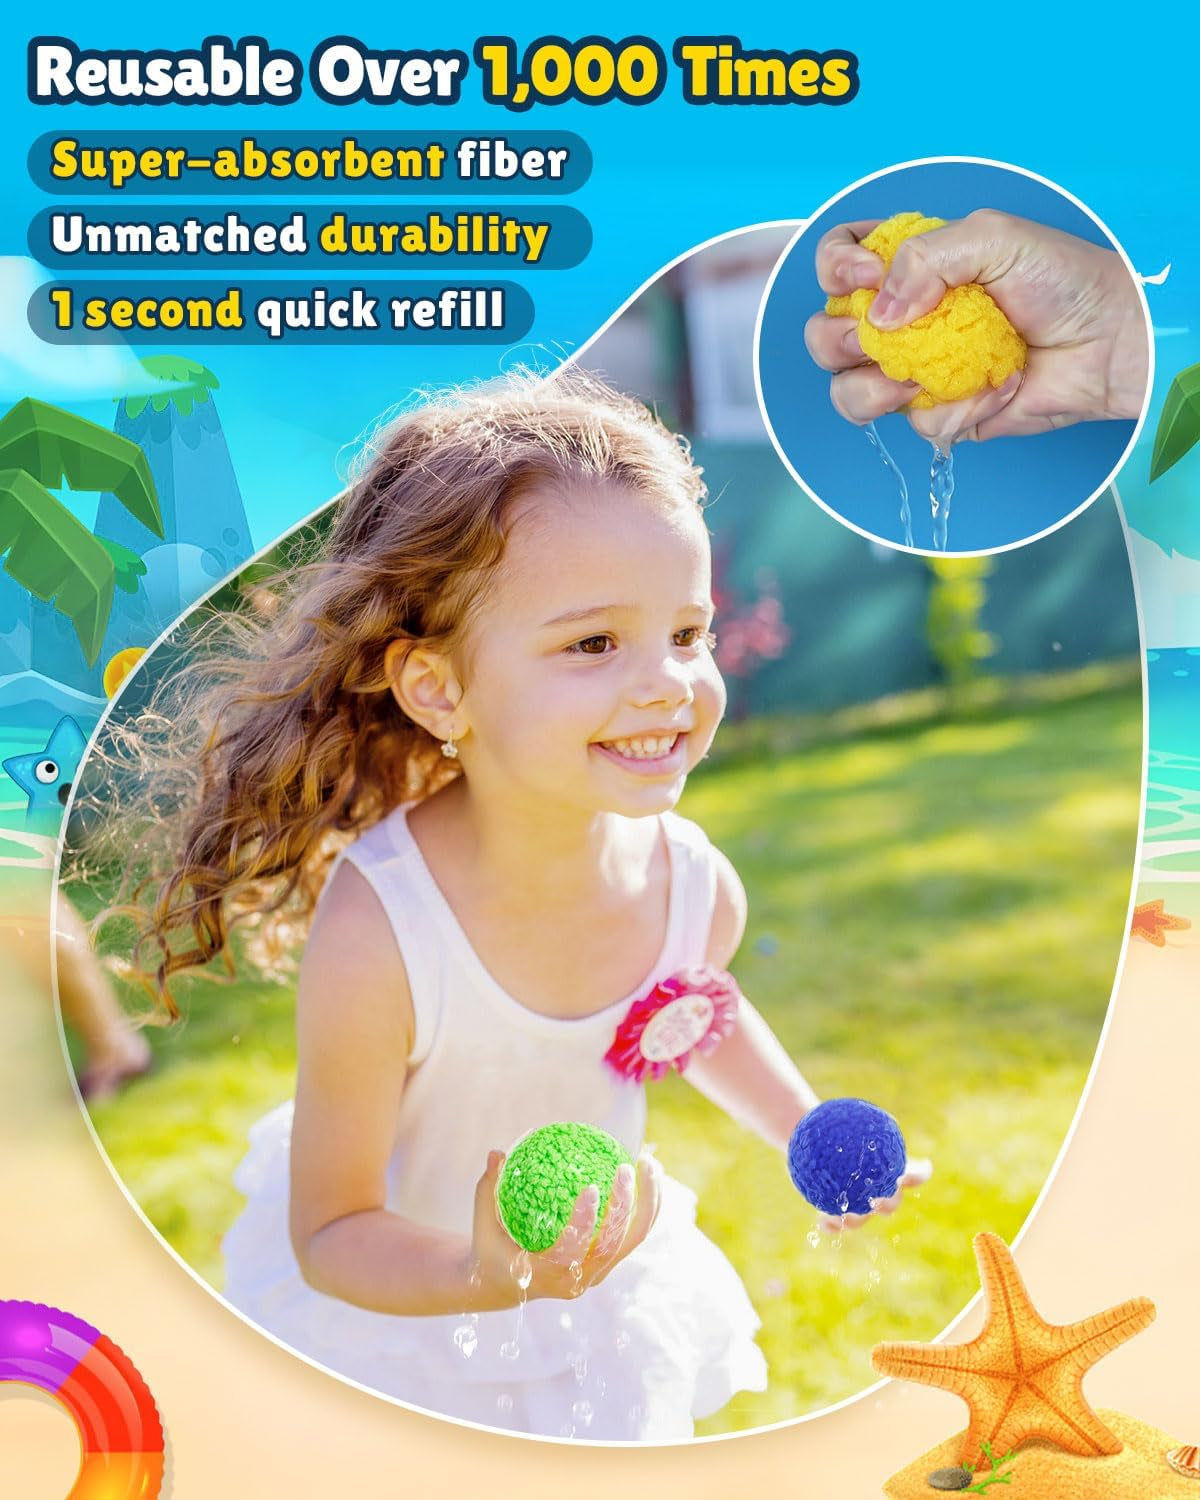 60 Pcs Water Balls Reusable Water Balloons for Kids Outdoor Games & Toys, Summer Water Toys outside Water Play Splash Balls for Pool Backyard Lawn Beach Fun Games